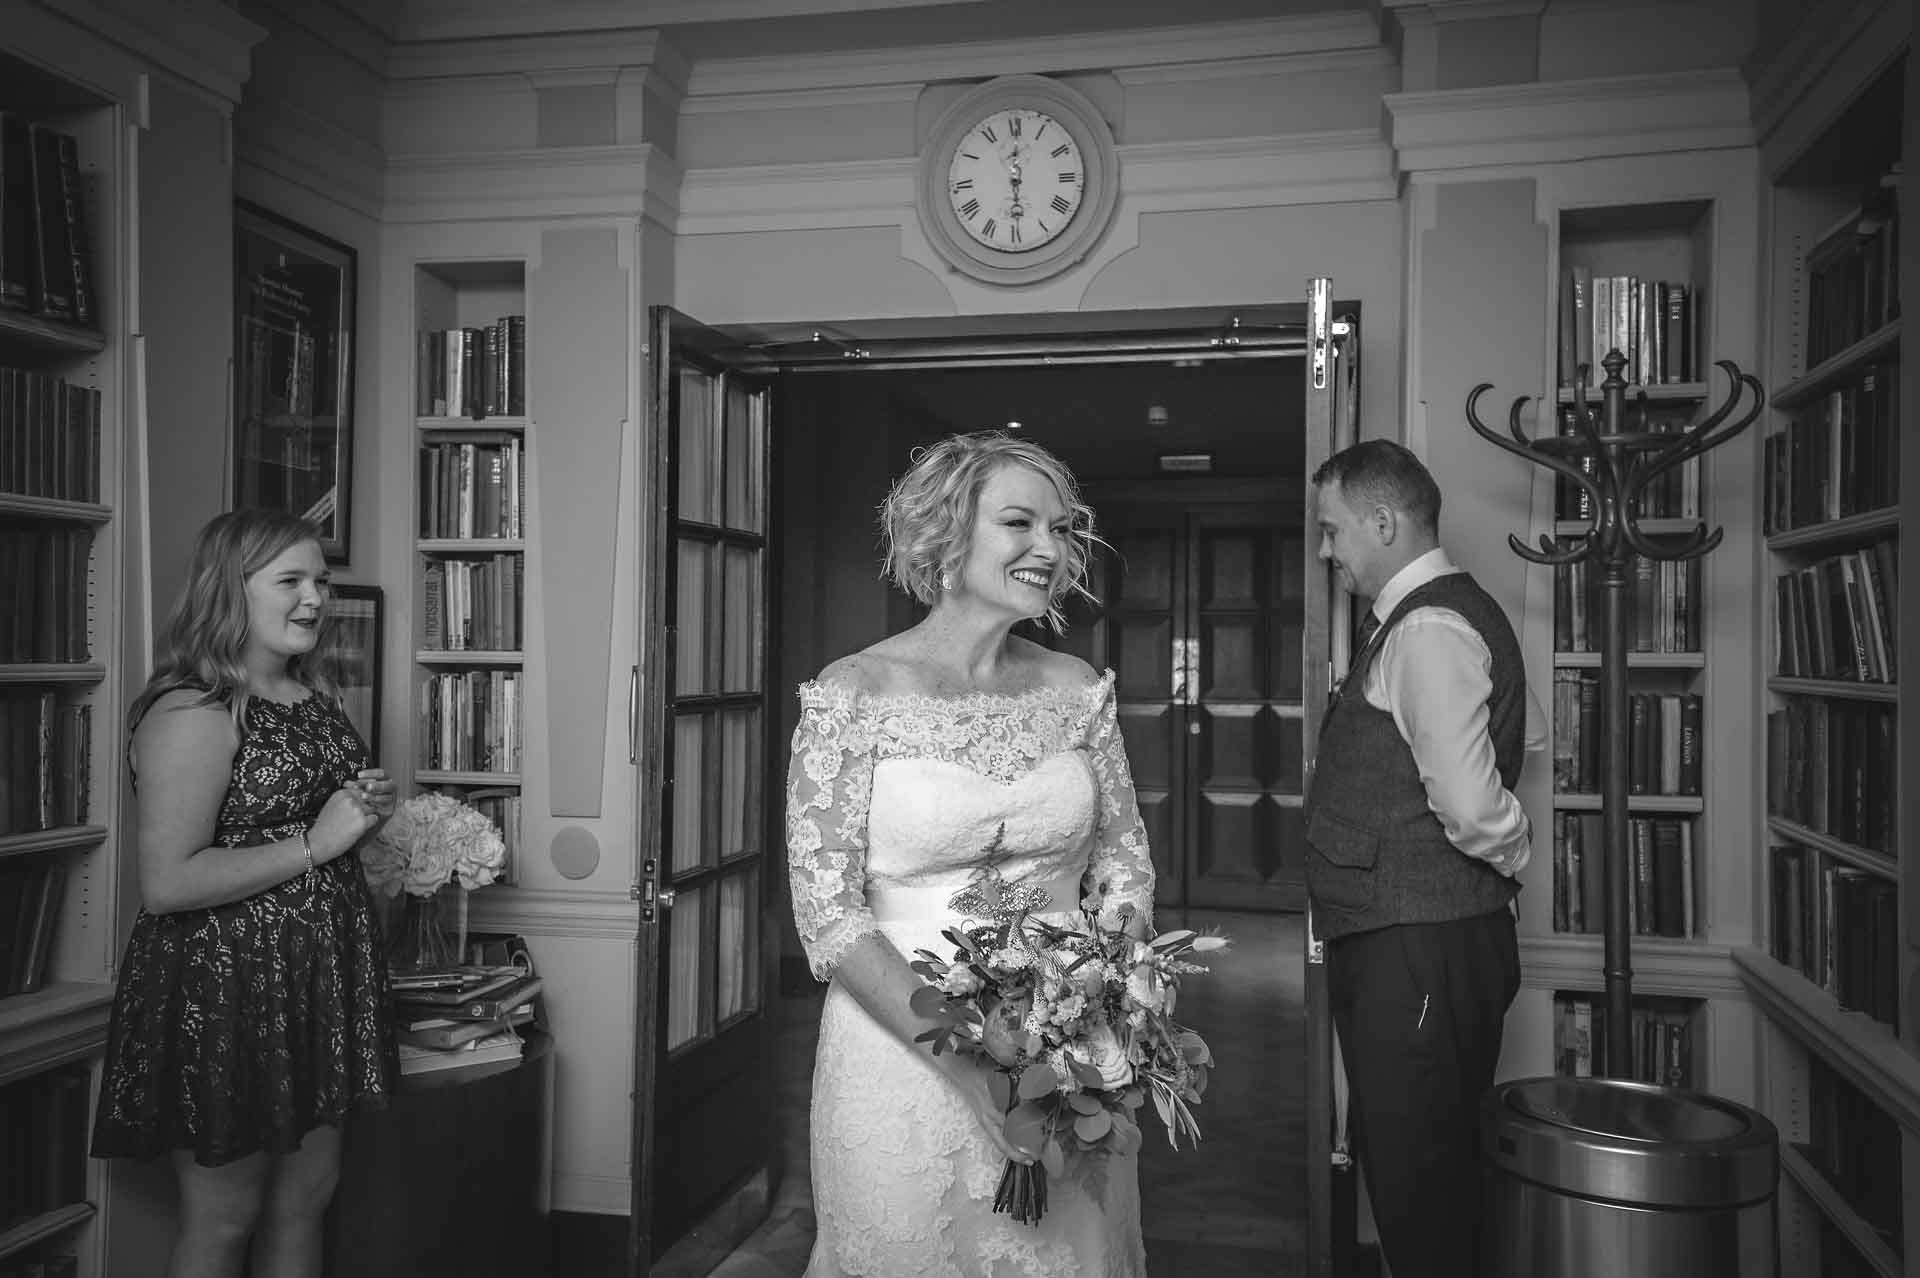 Bride enters the ceremony room at the Bloomsbury Hotel for wedding